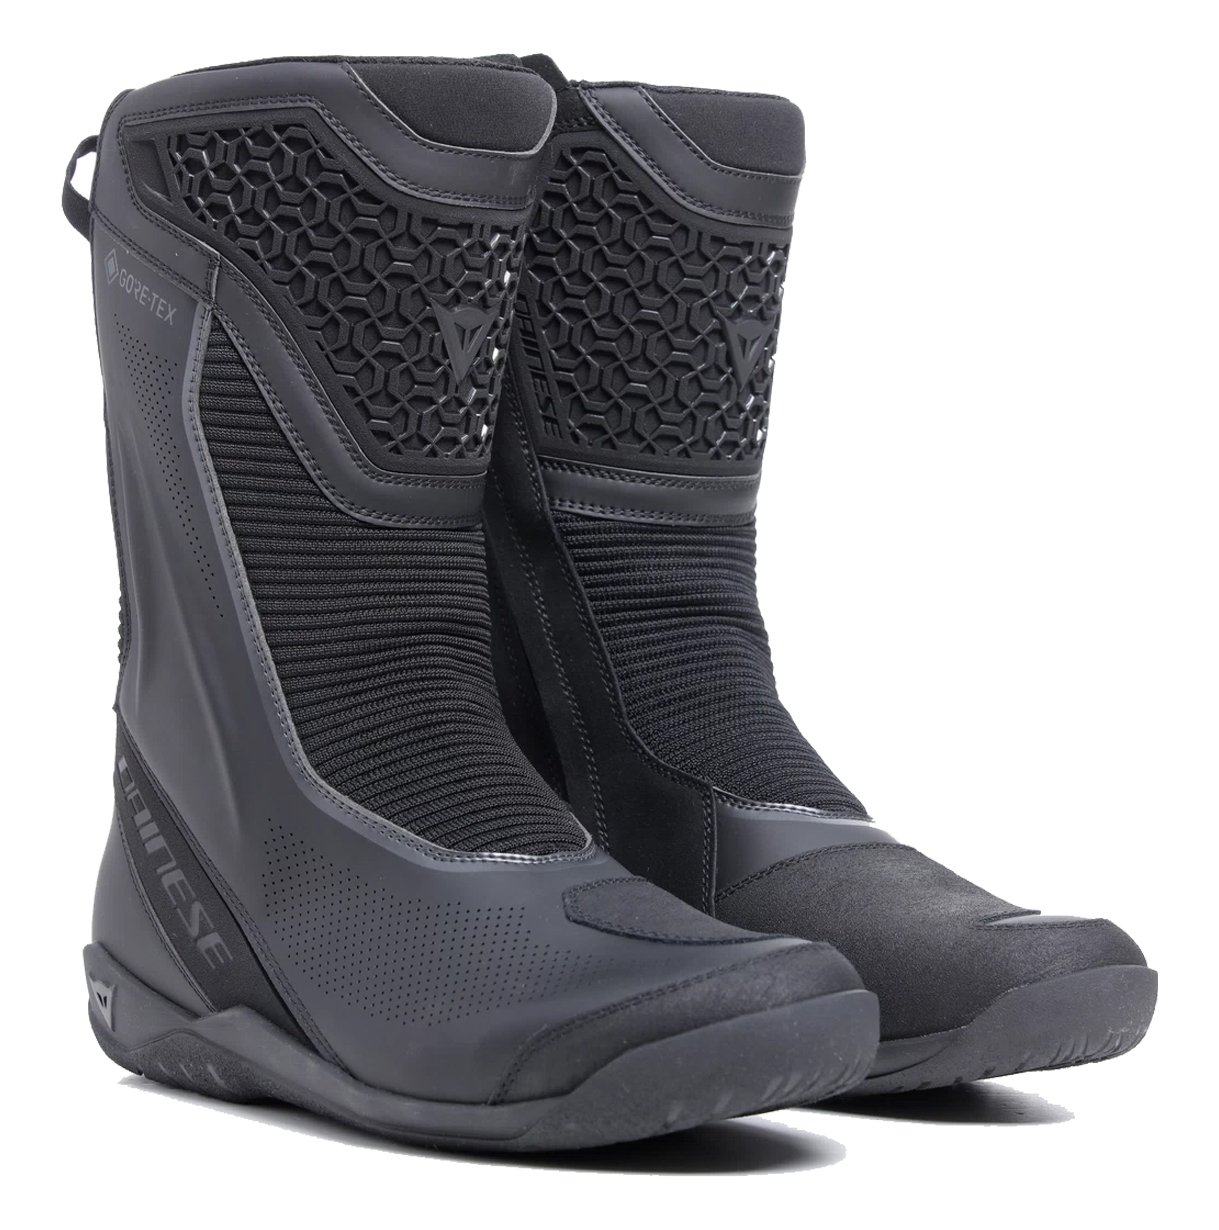 Image of Dainese Freeland 2 Gore-Tex Boots Black Size 50 ID 8051019692696